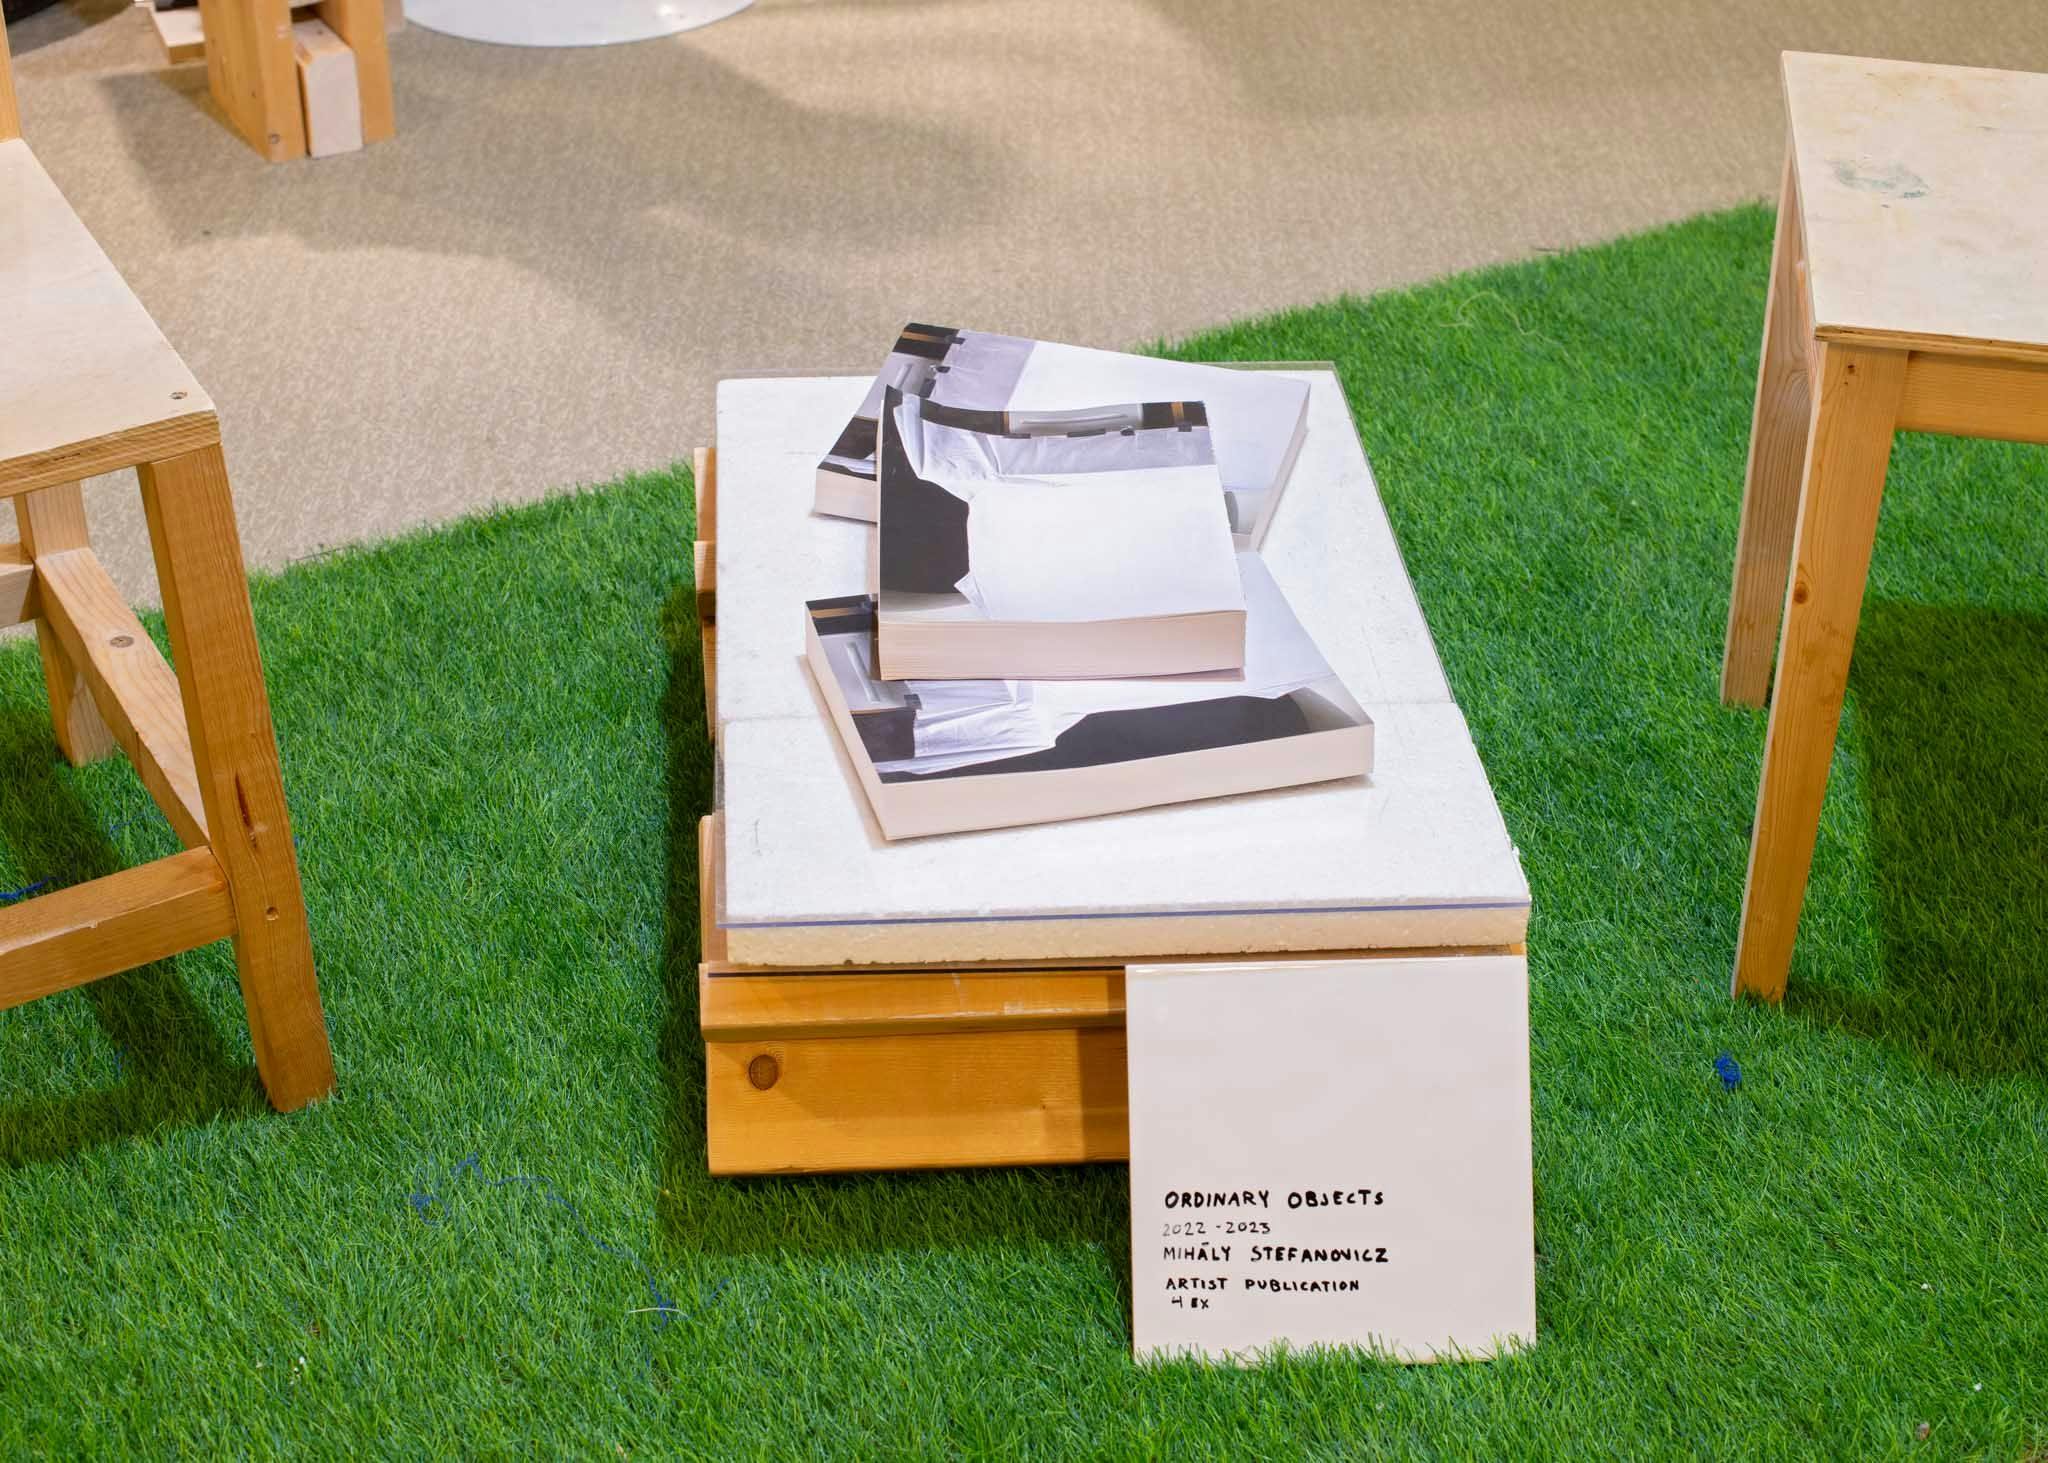 Three books lay on a low table, on artificial grass. A sign reads 'Ordinary objects'.